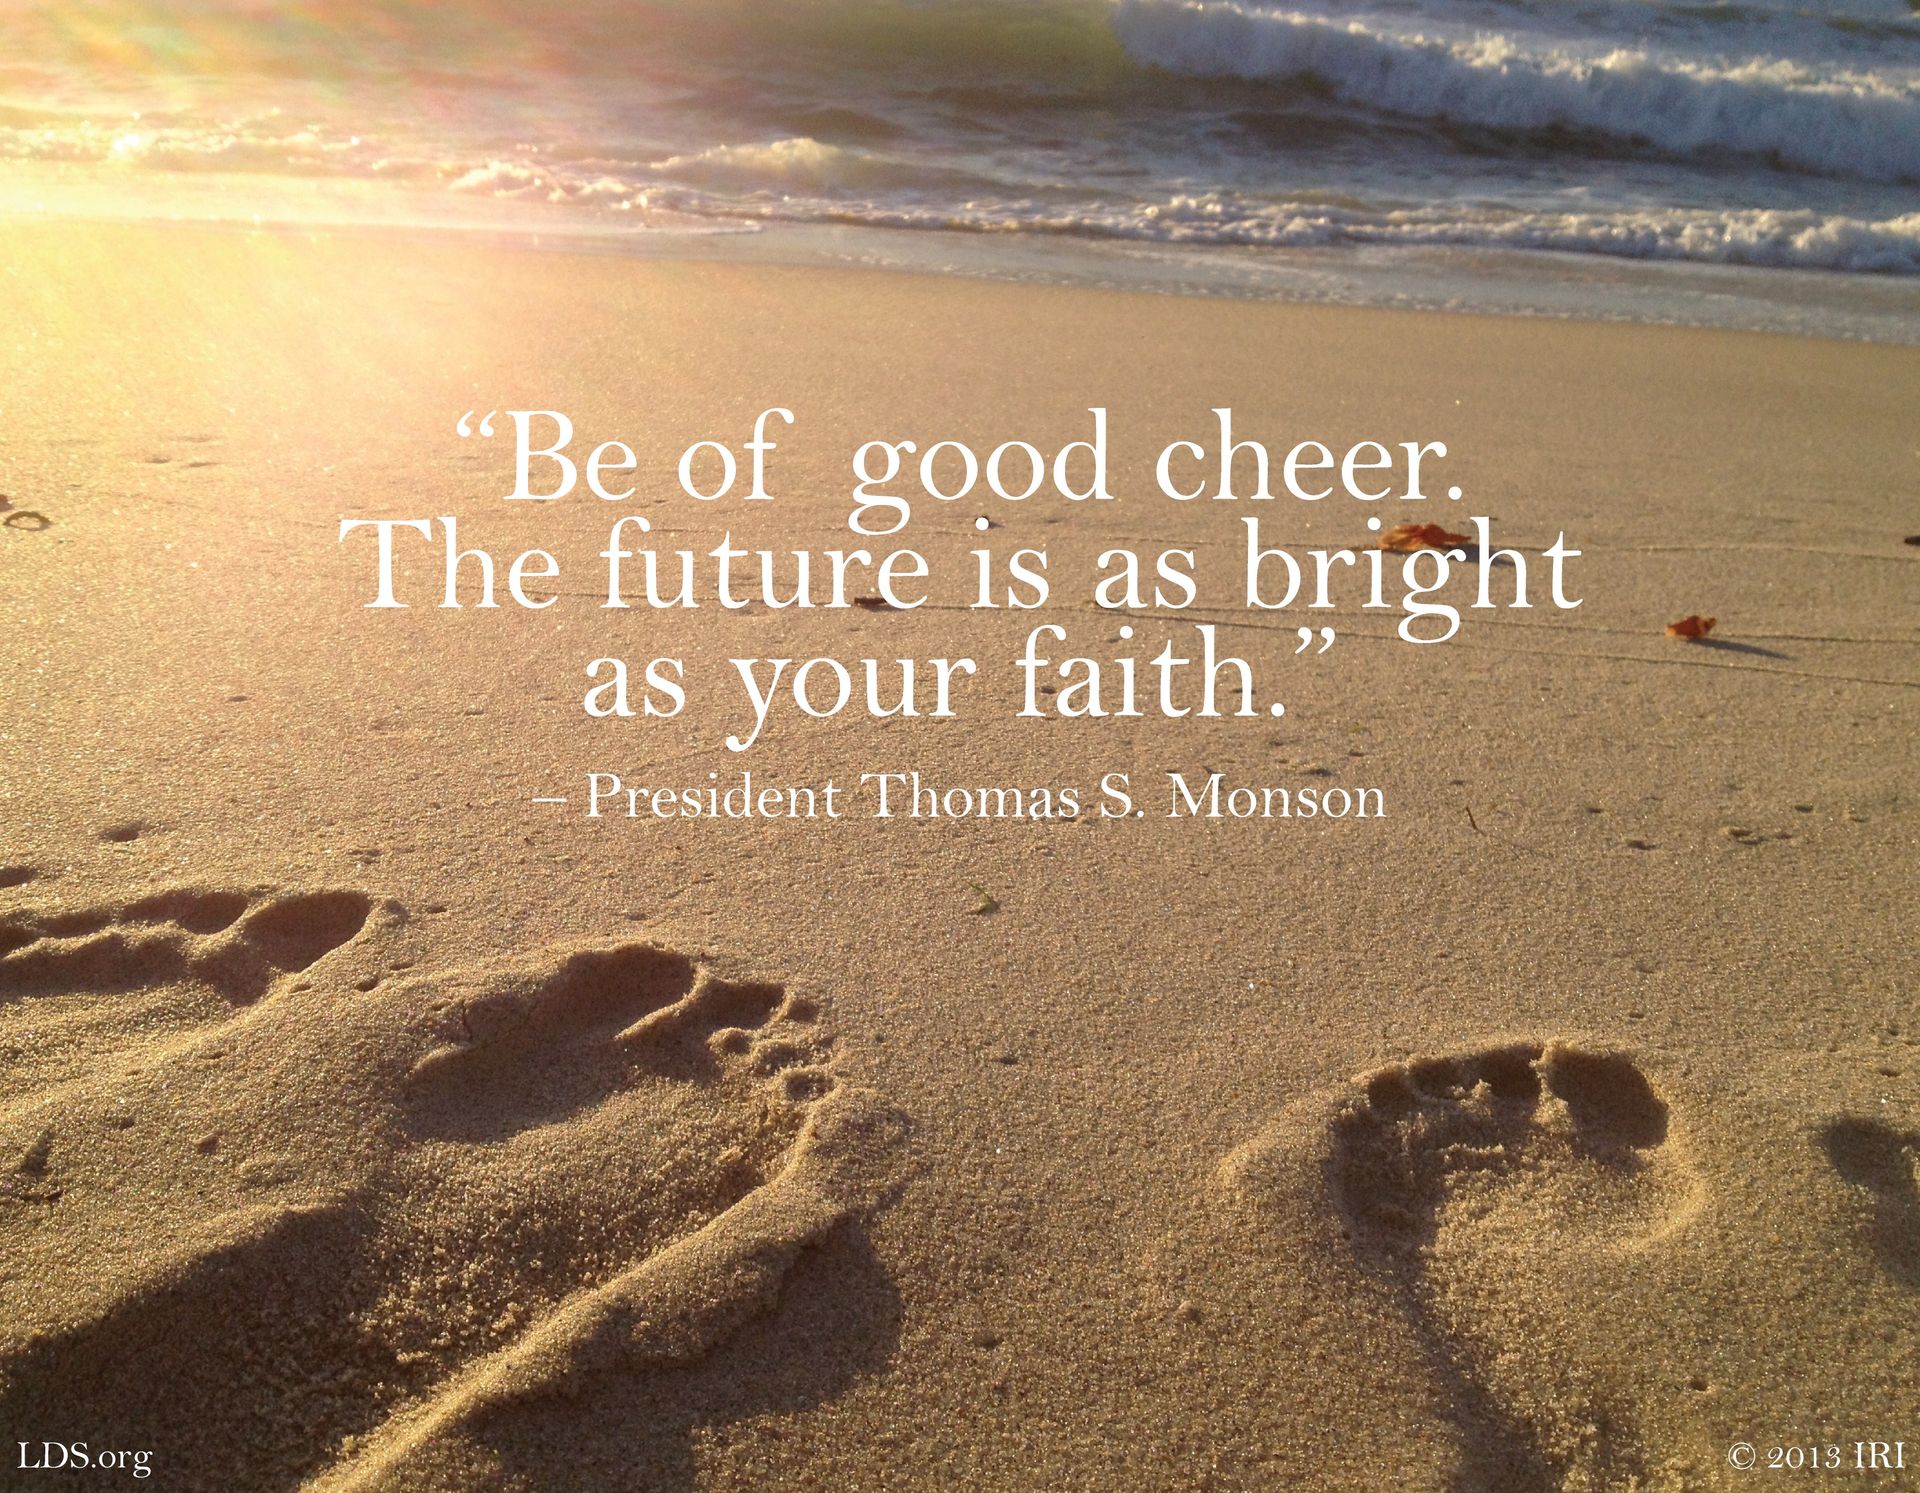 “Be of good cheer. The future is as bright as your faith.”—President Thomas S. Monson, “Be of Good Cheer” © undefined ipCode 1.